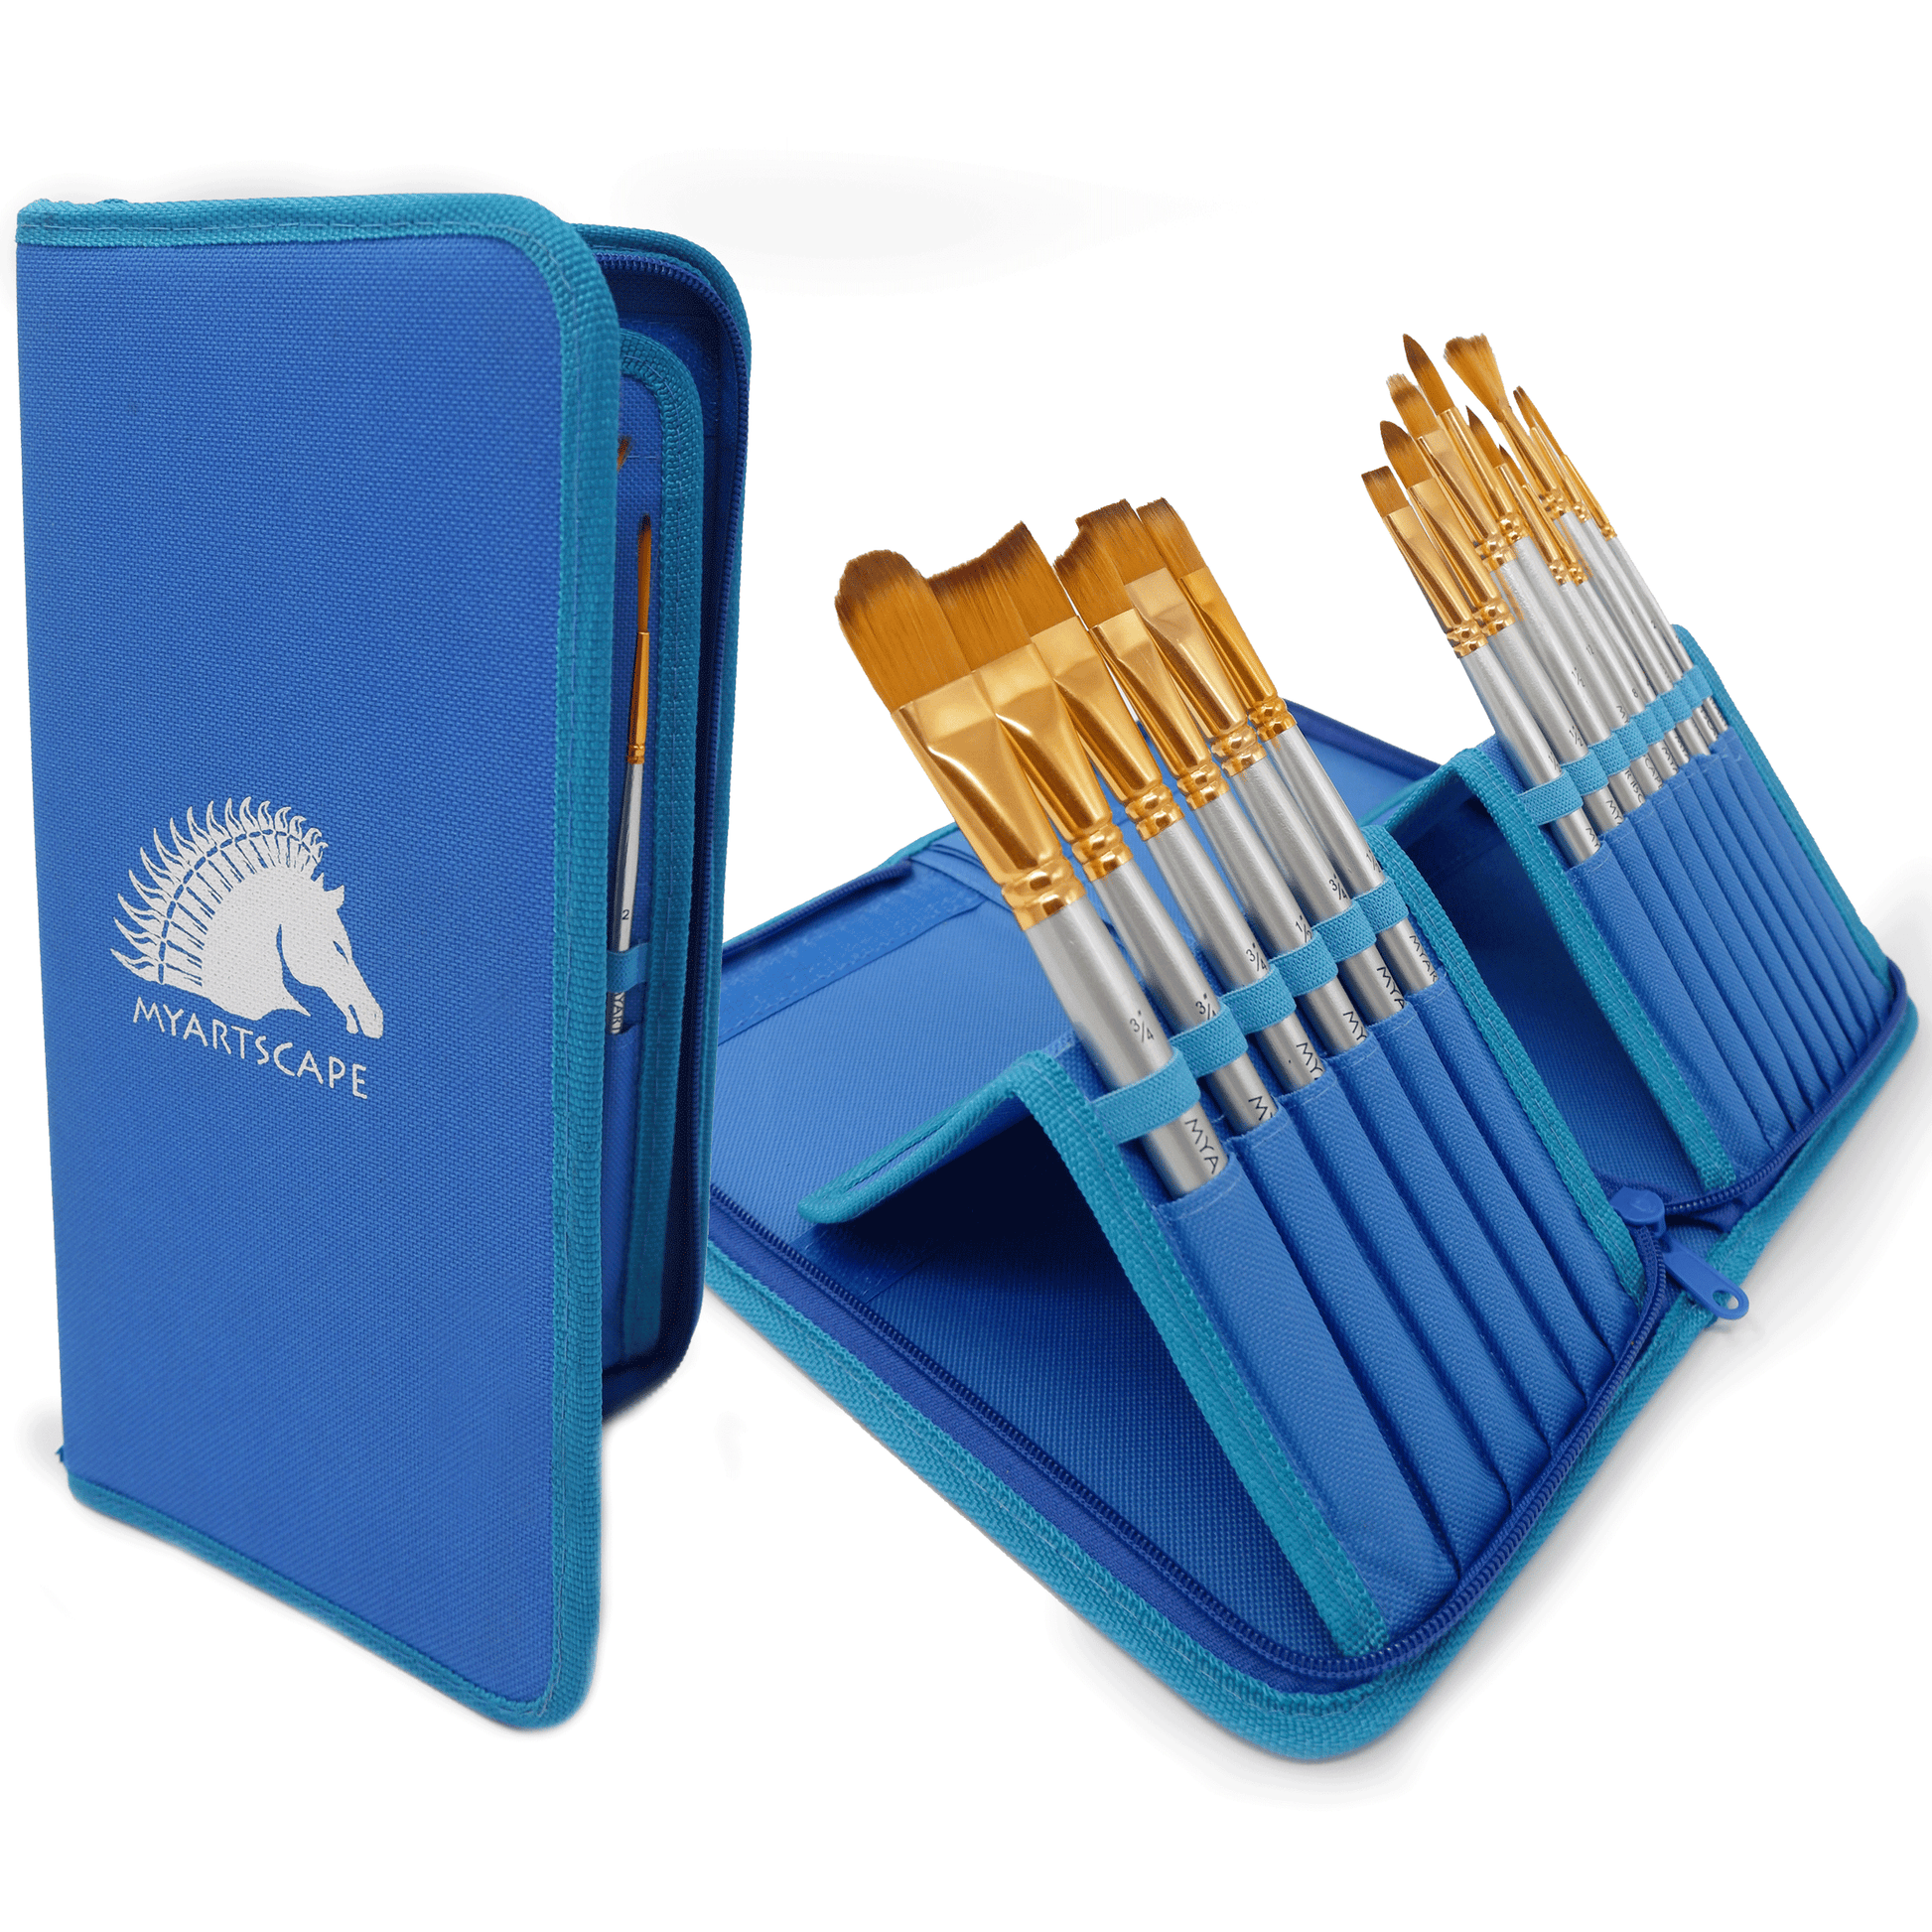 Paint Brush Set of 15 Round and Flat Short-Handle Brushes, Handmade in USA,  Includes FREE Canvas Holder